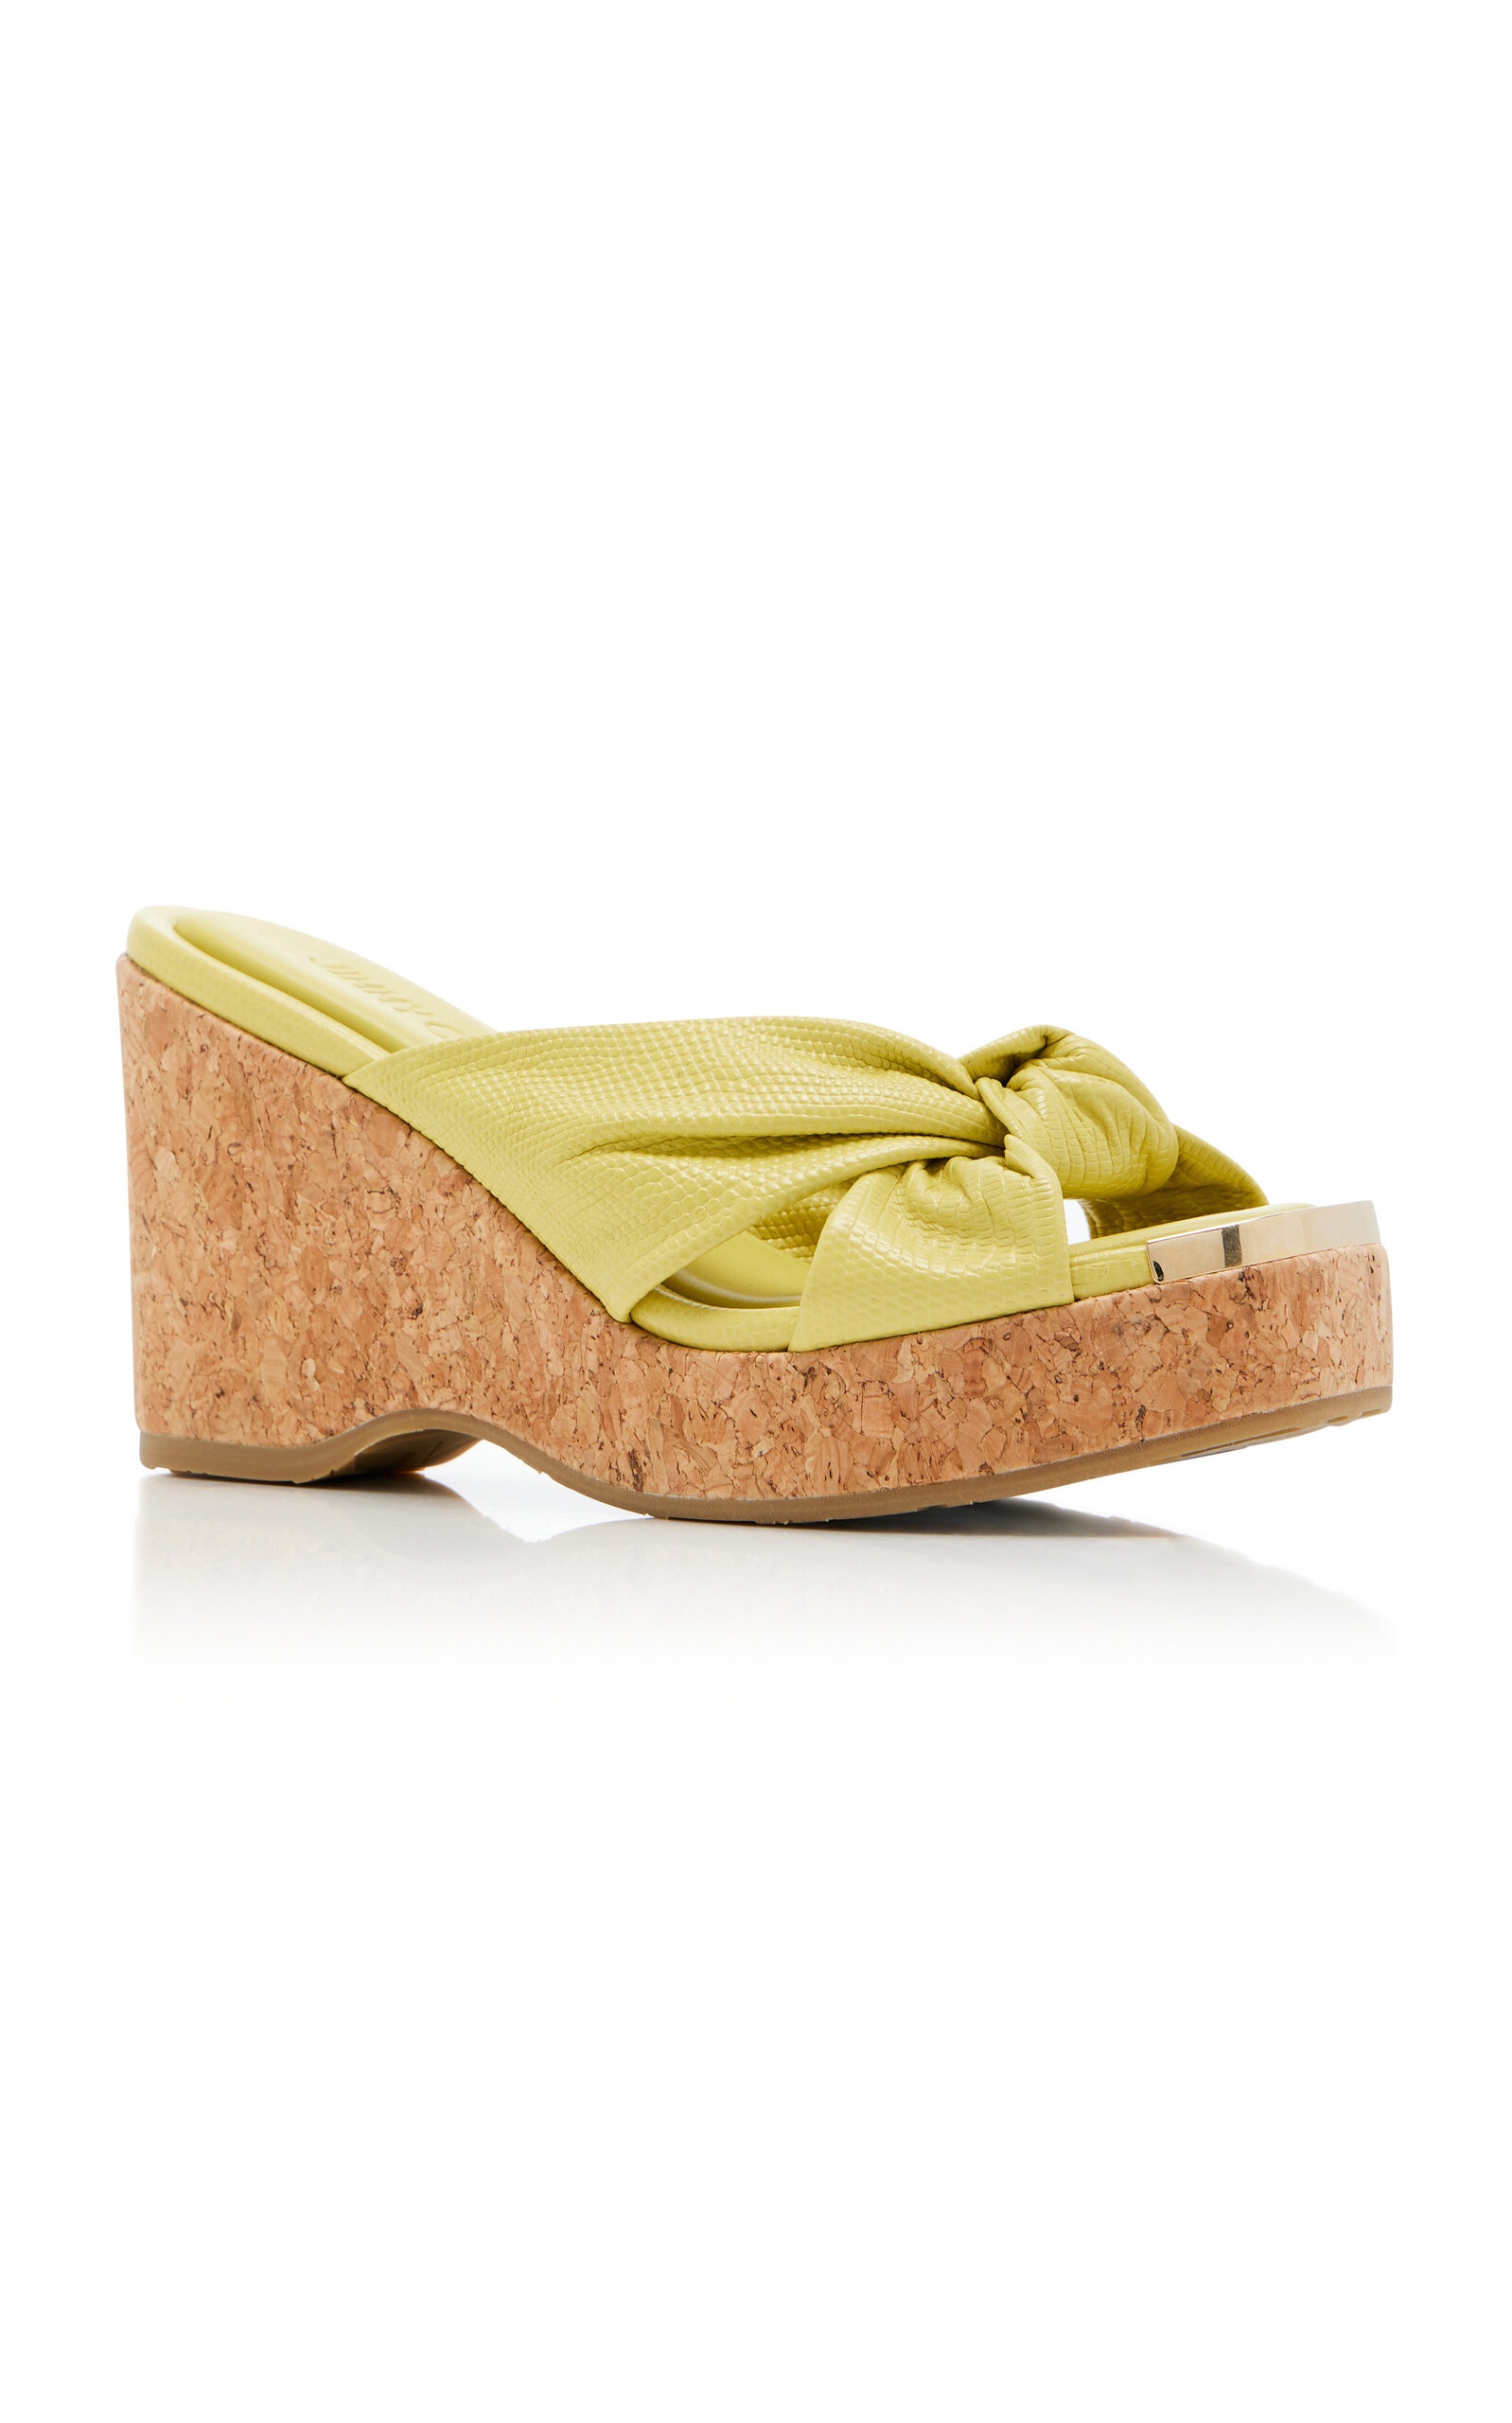 Avenue Lizard-Effect Leather Wedge Sandals yellow - 4